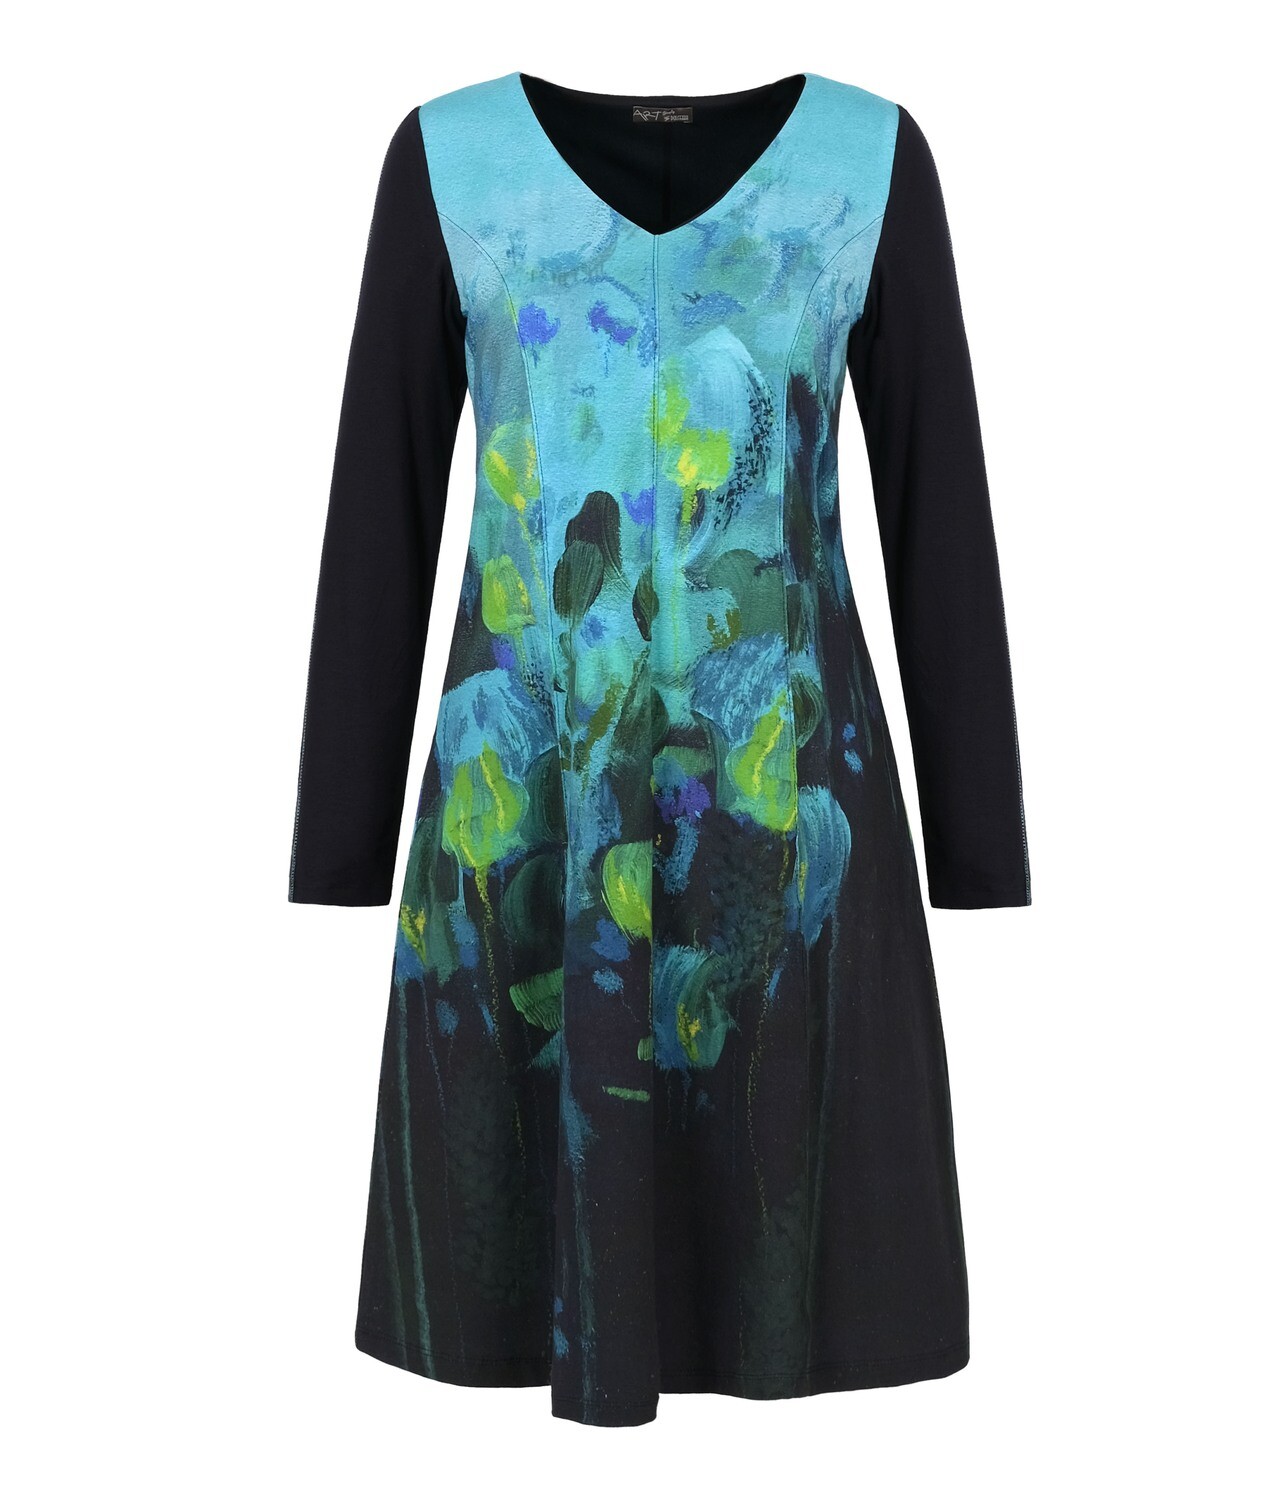 Simply Art Dolcezza: Fantaisie Floralge Abstract Art Flare Dress SOLD OUT